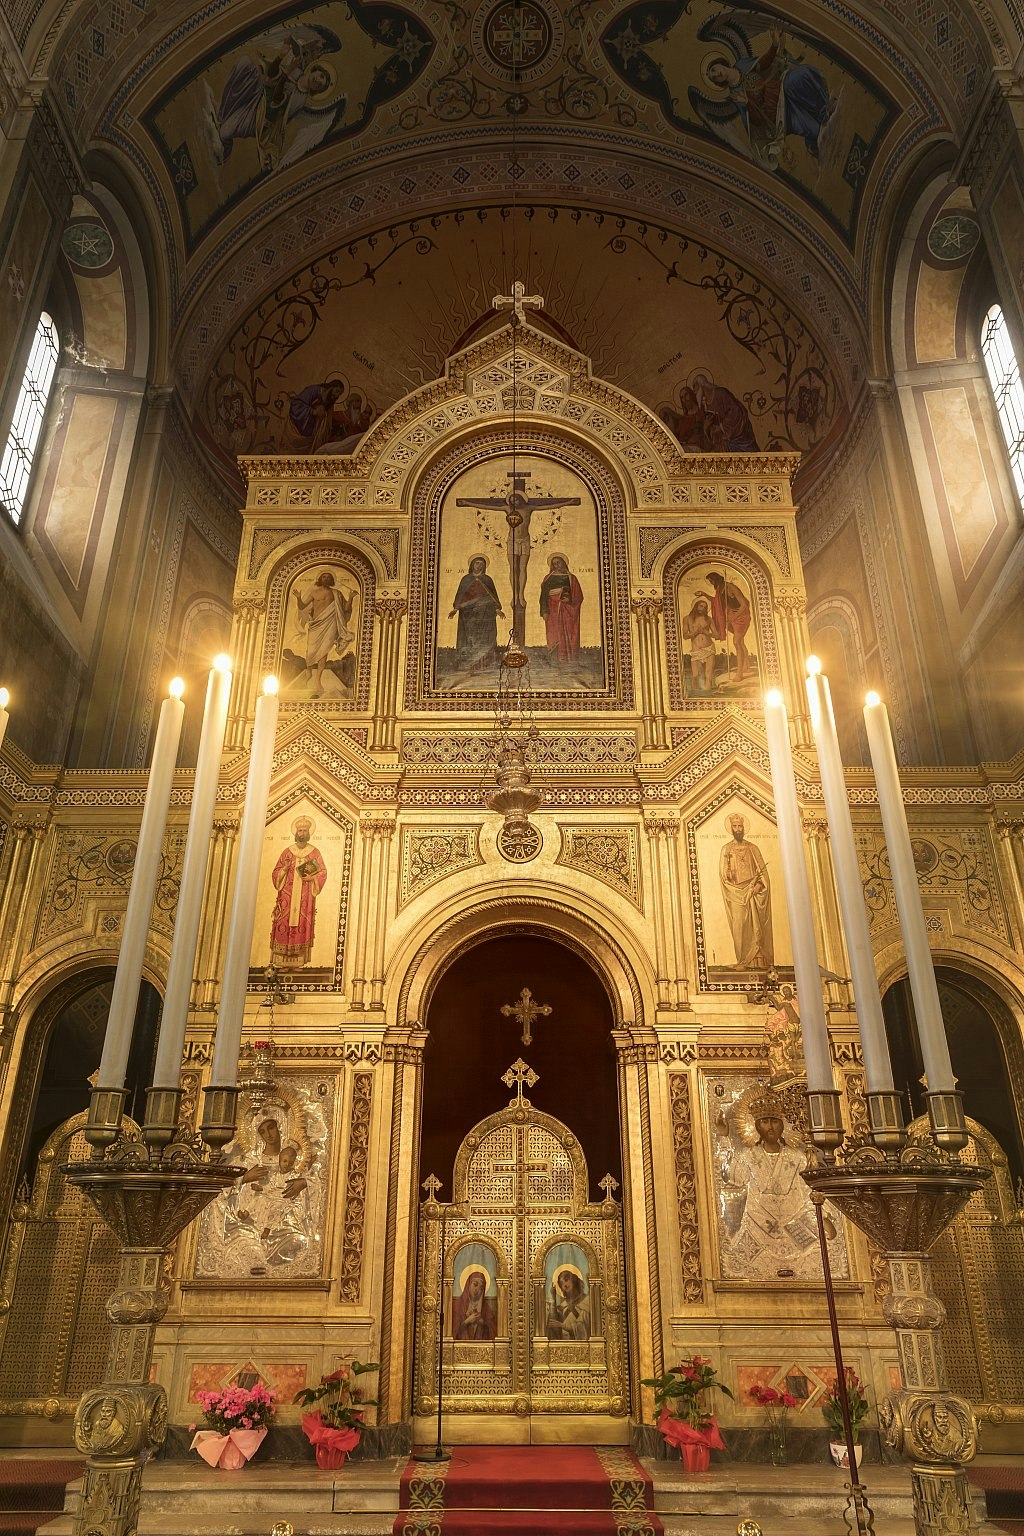 The altar area of an Orthodox church, behind an ornate gold iconostasis (altar screen) bearing religious imagery.